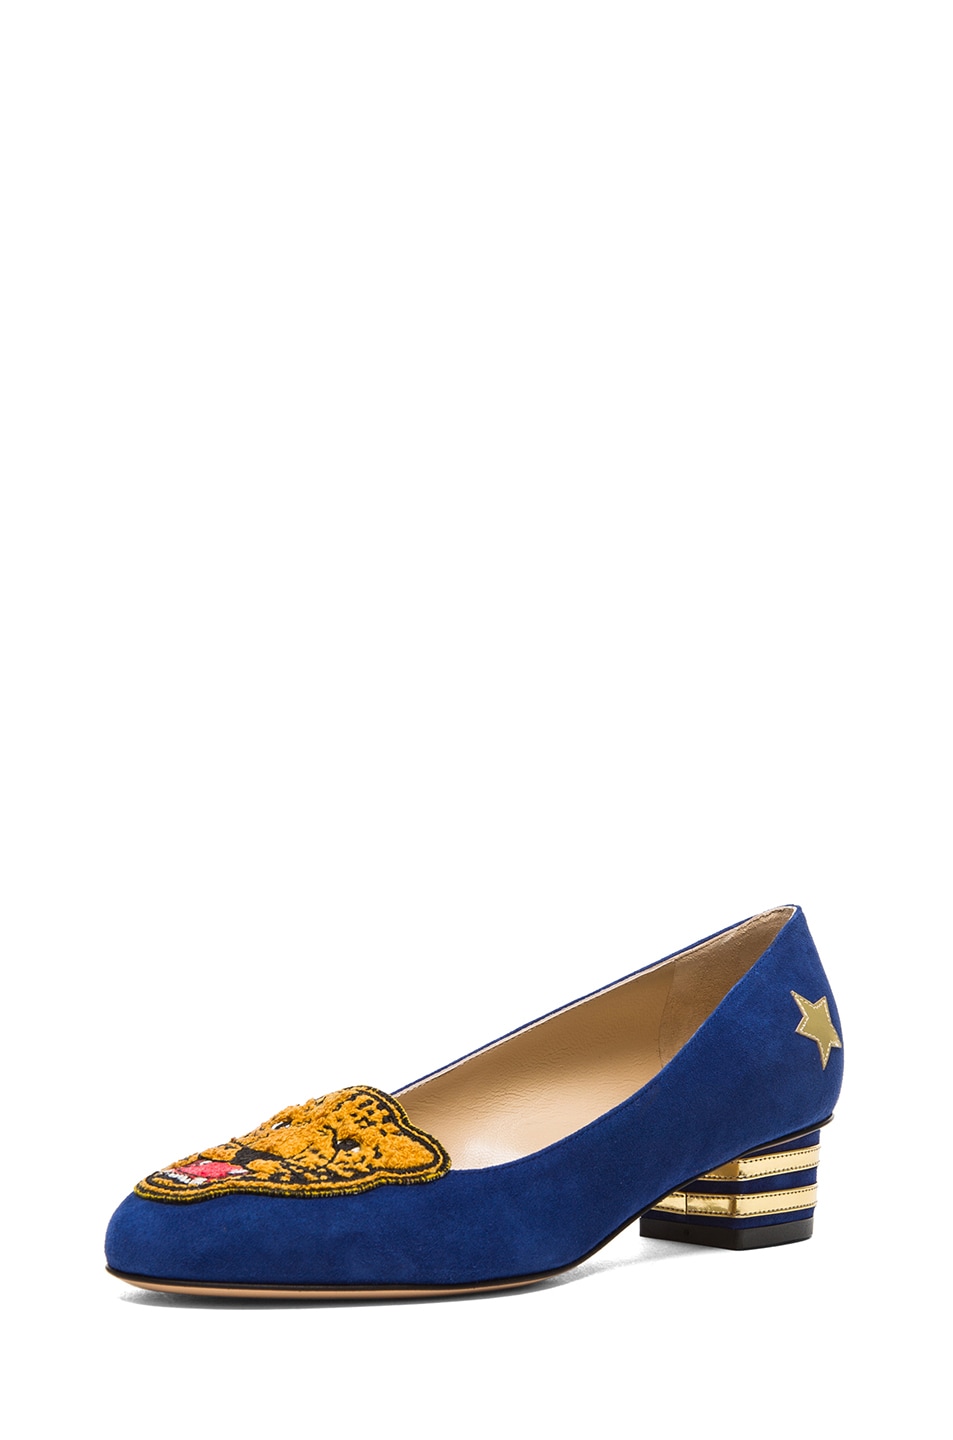 Charlotte Olympia Mascot Suede Heeled Flats in Varsity Blue | FWRD